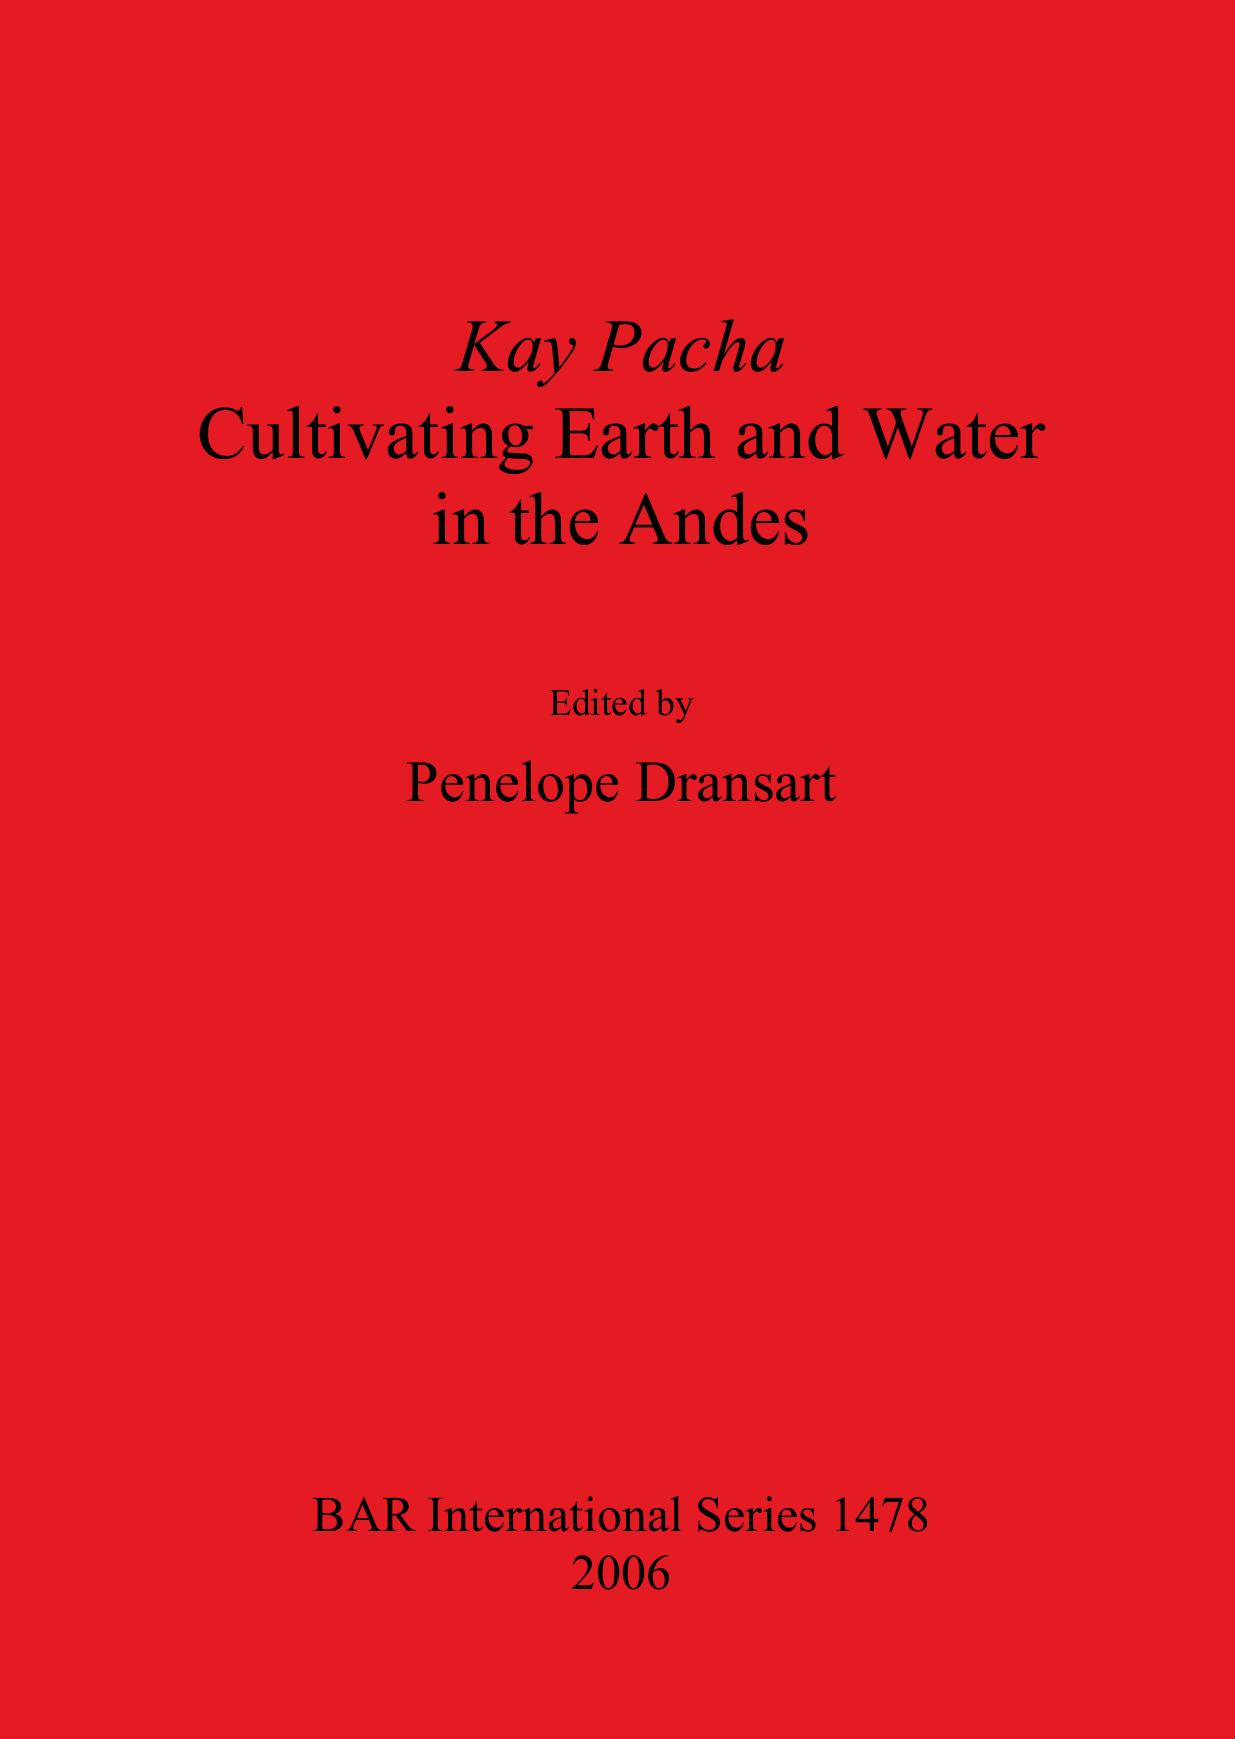 Kay Pacha: Cultivating earth and water in the Andes by Penelope Dransart (editor)